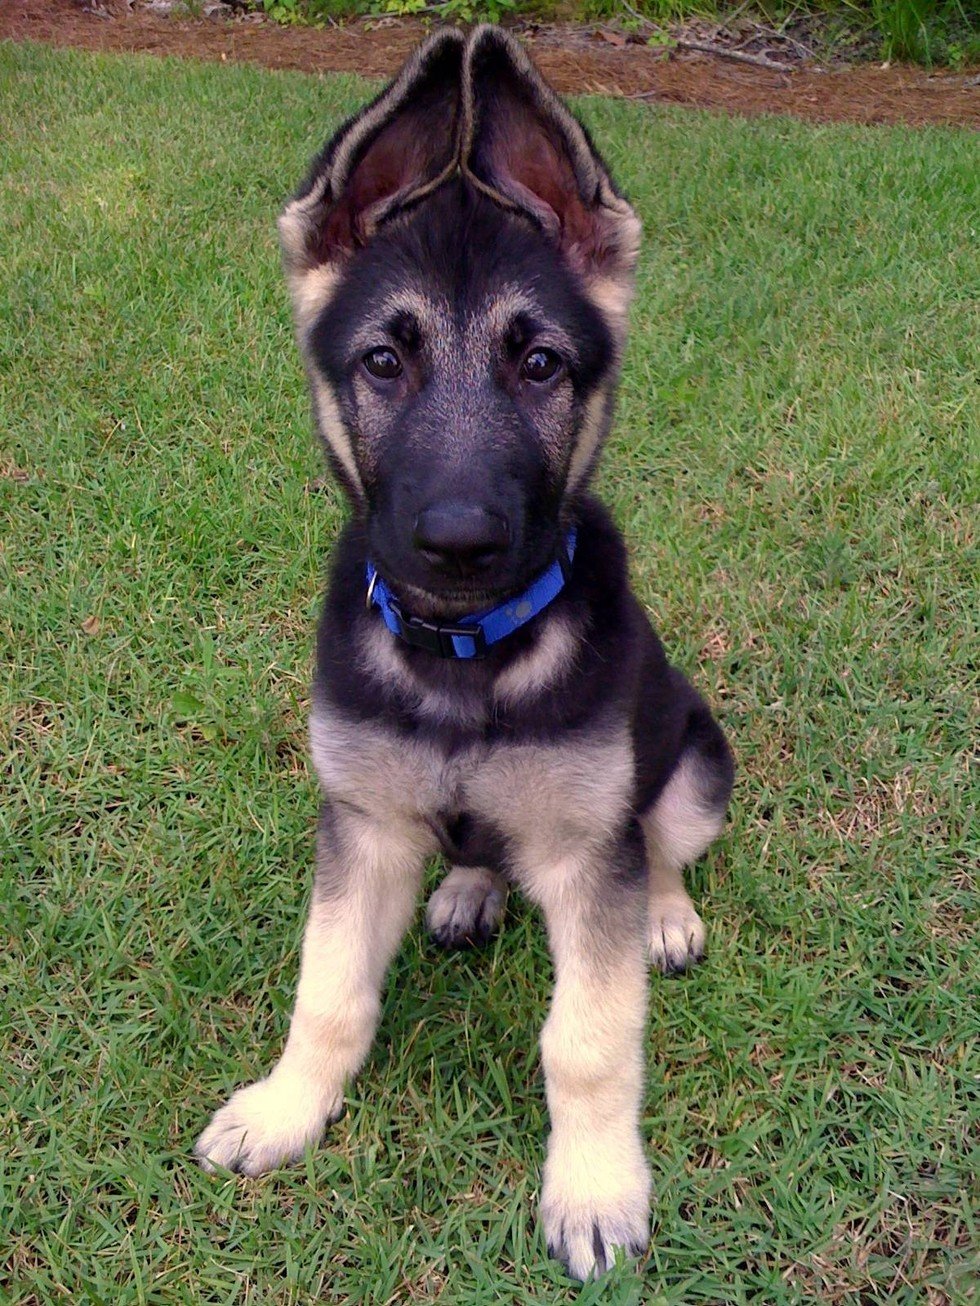 16 Puppies Who Will Grow Into Those Ears ... Eventually